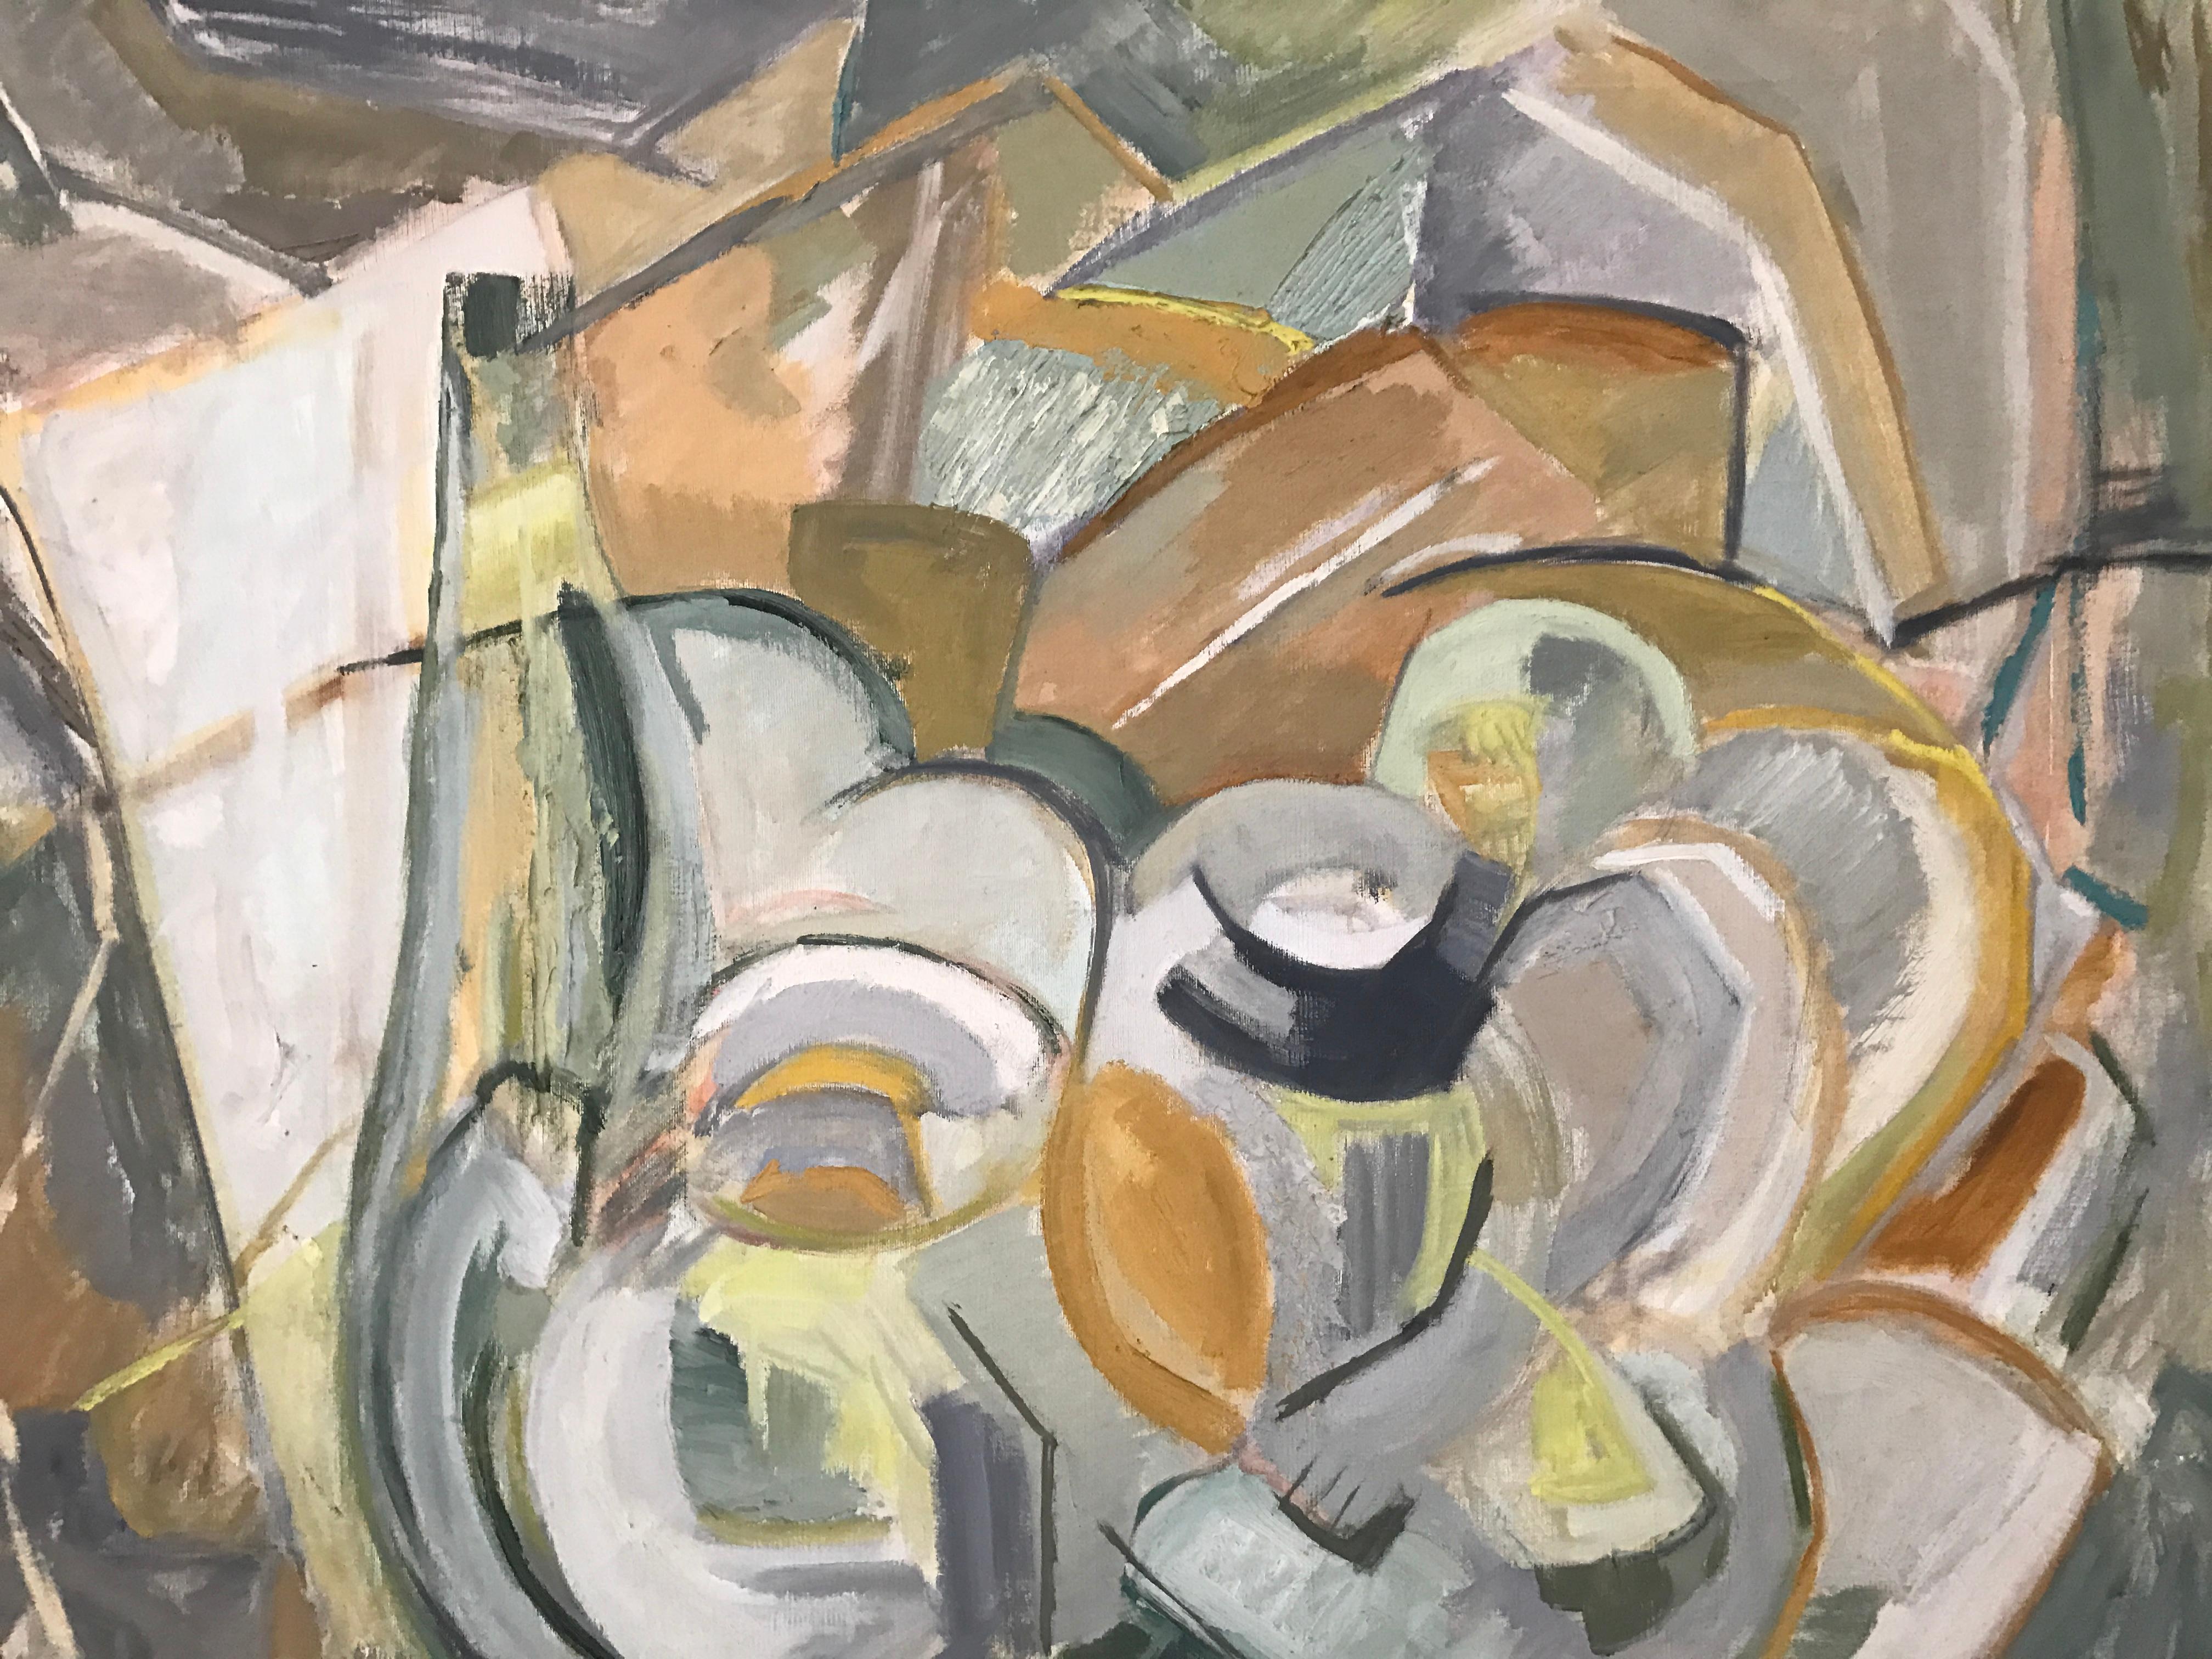 Large modernist Abstract Expressionist still life painting, circa 1950s. Beautiful colors and execution. Artist unknown. Wear to the original artist-made frame.
Measures: 36